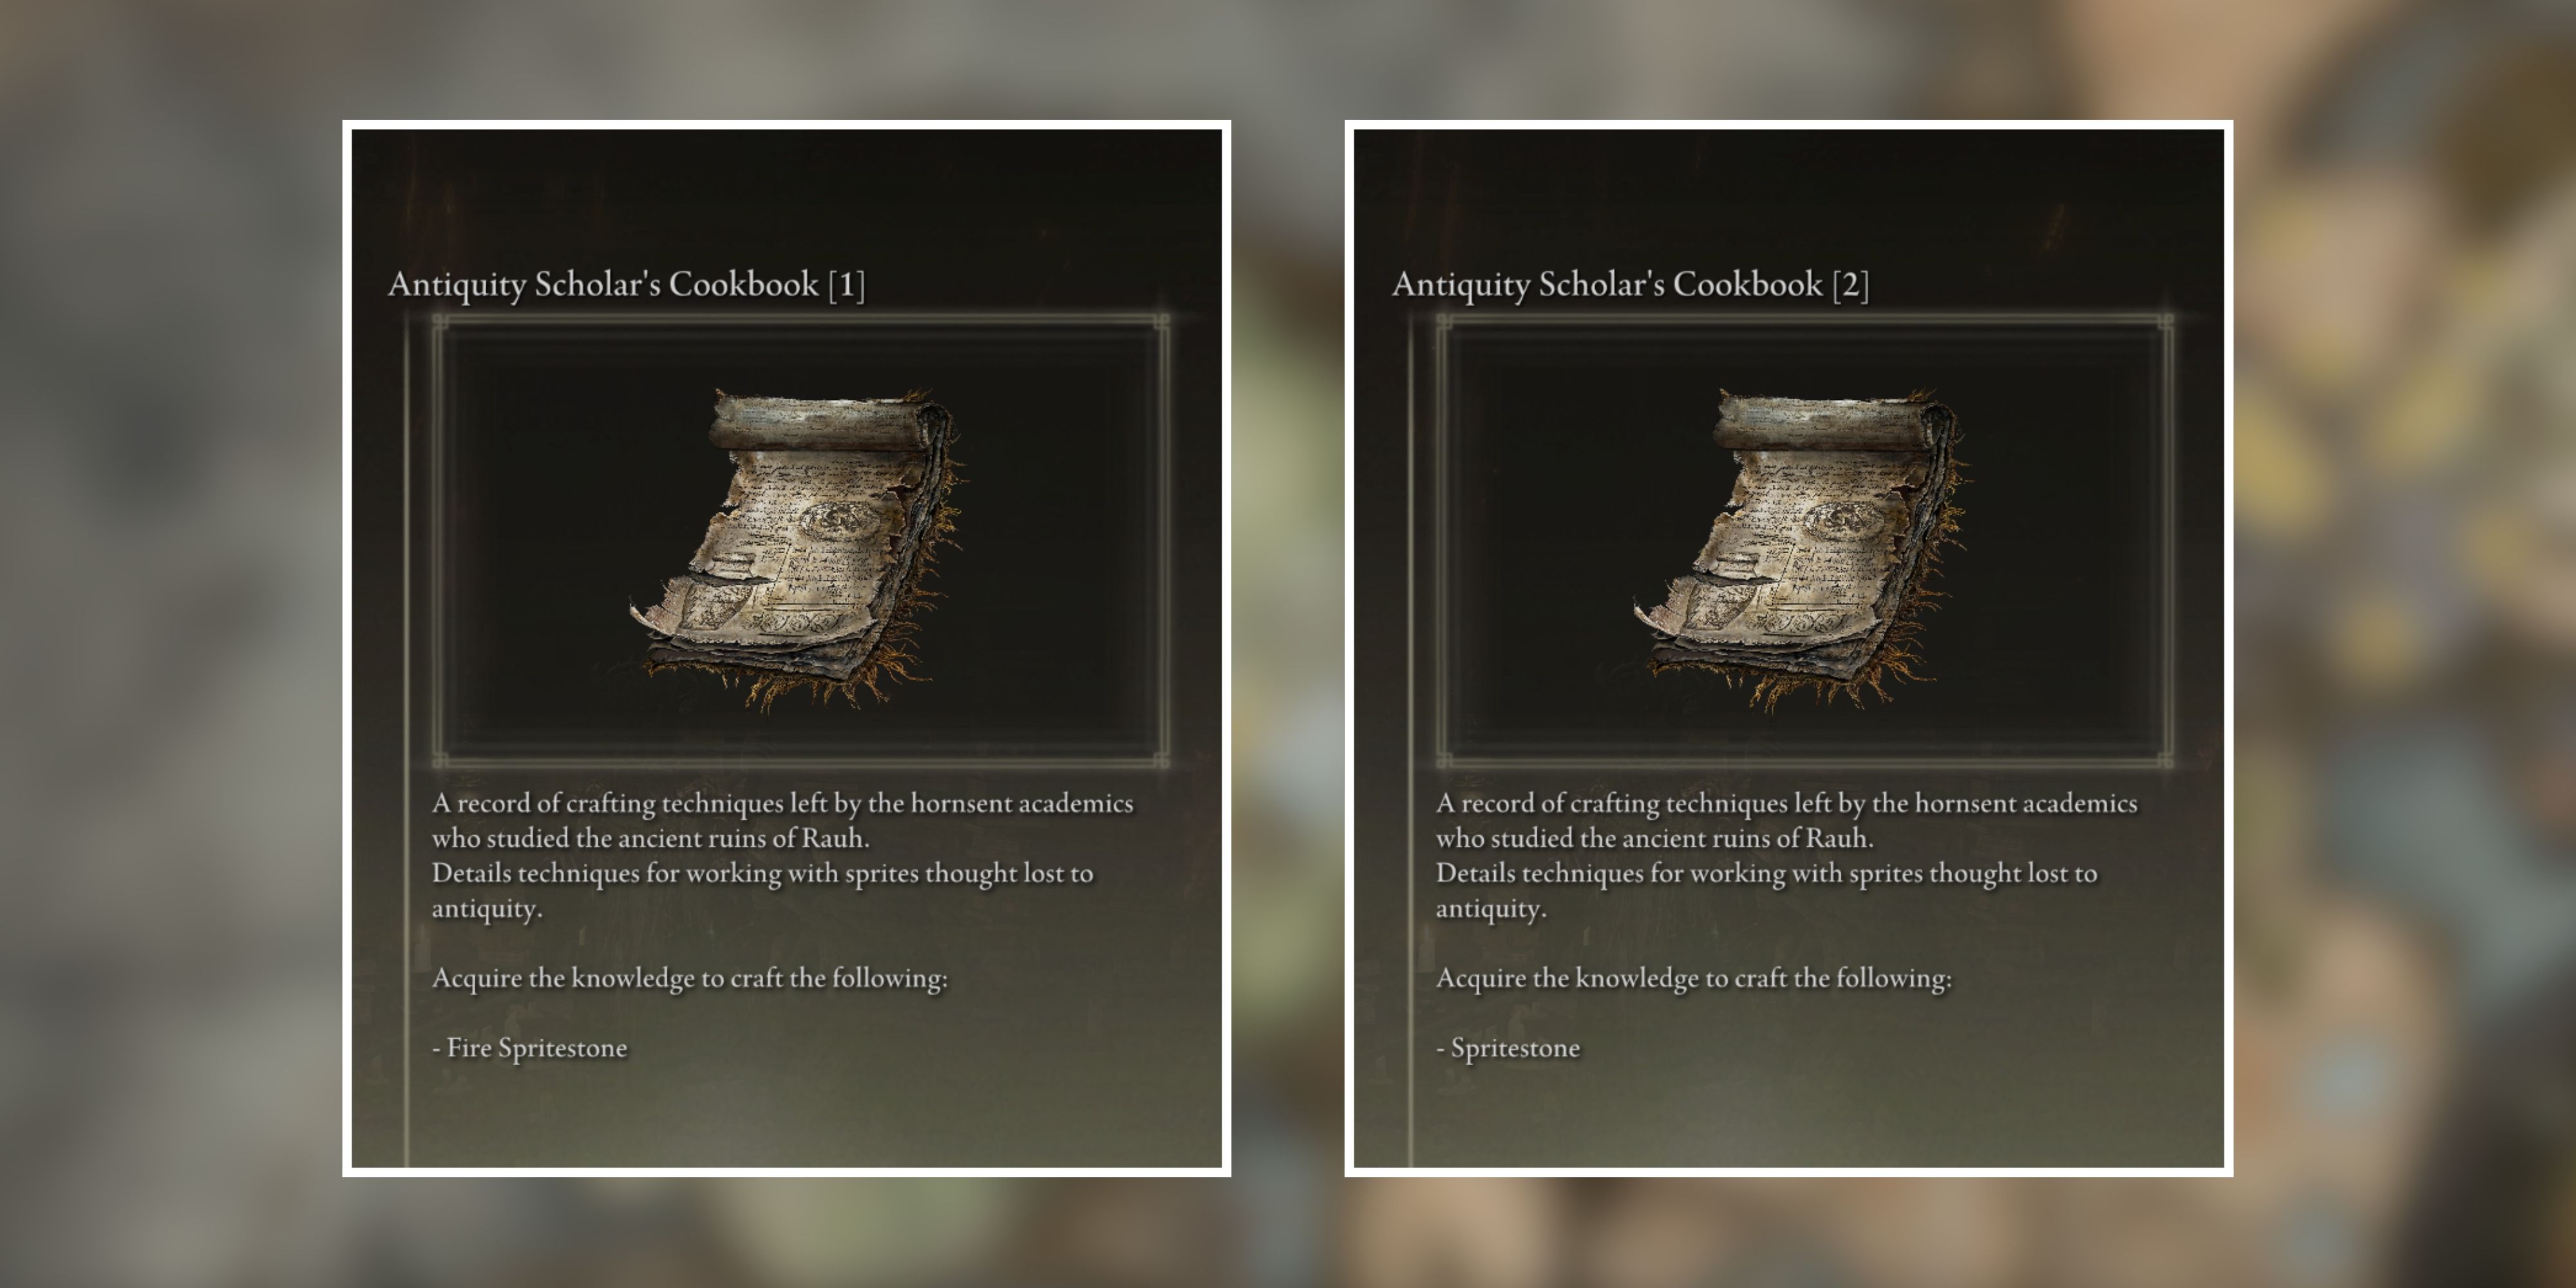 All Antiquity Scholar's Cookbooks in Elden Ring Shadow of the Erdtree feature image